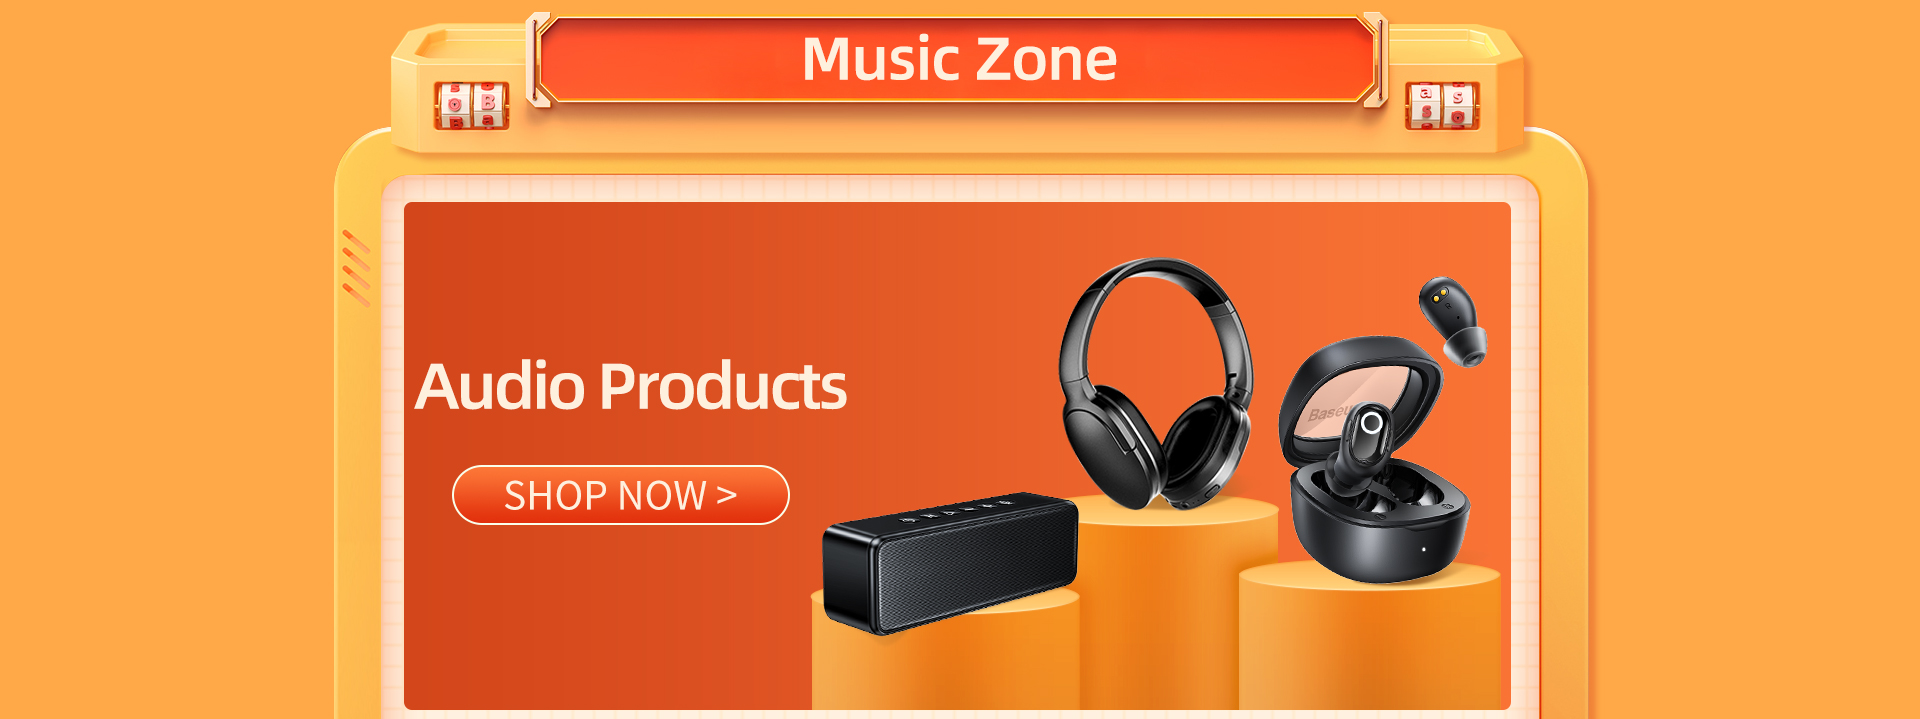 BASEUS Officialflagship Store - Amazing products with exclusive discounts  on AliExpress